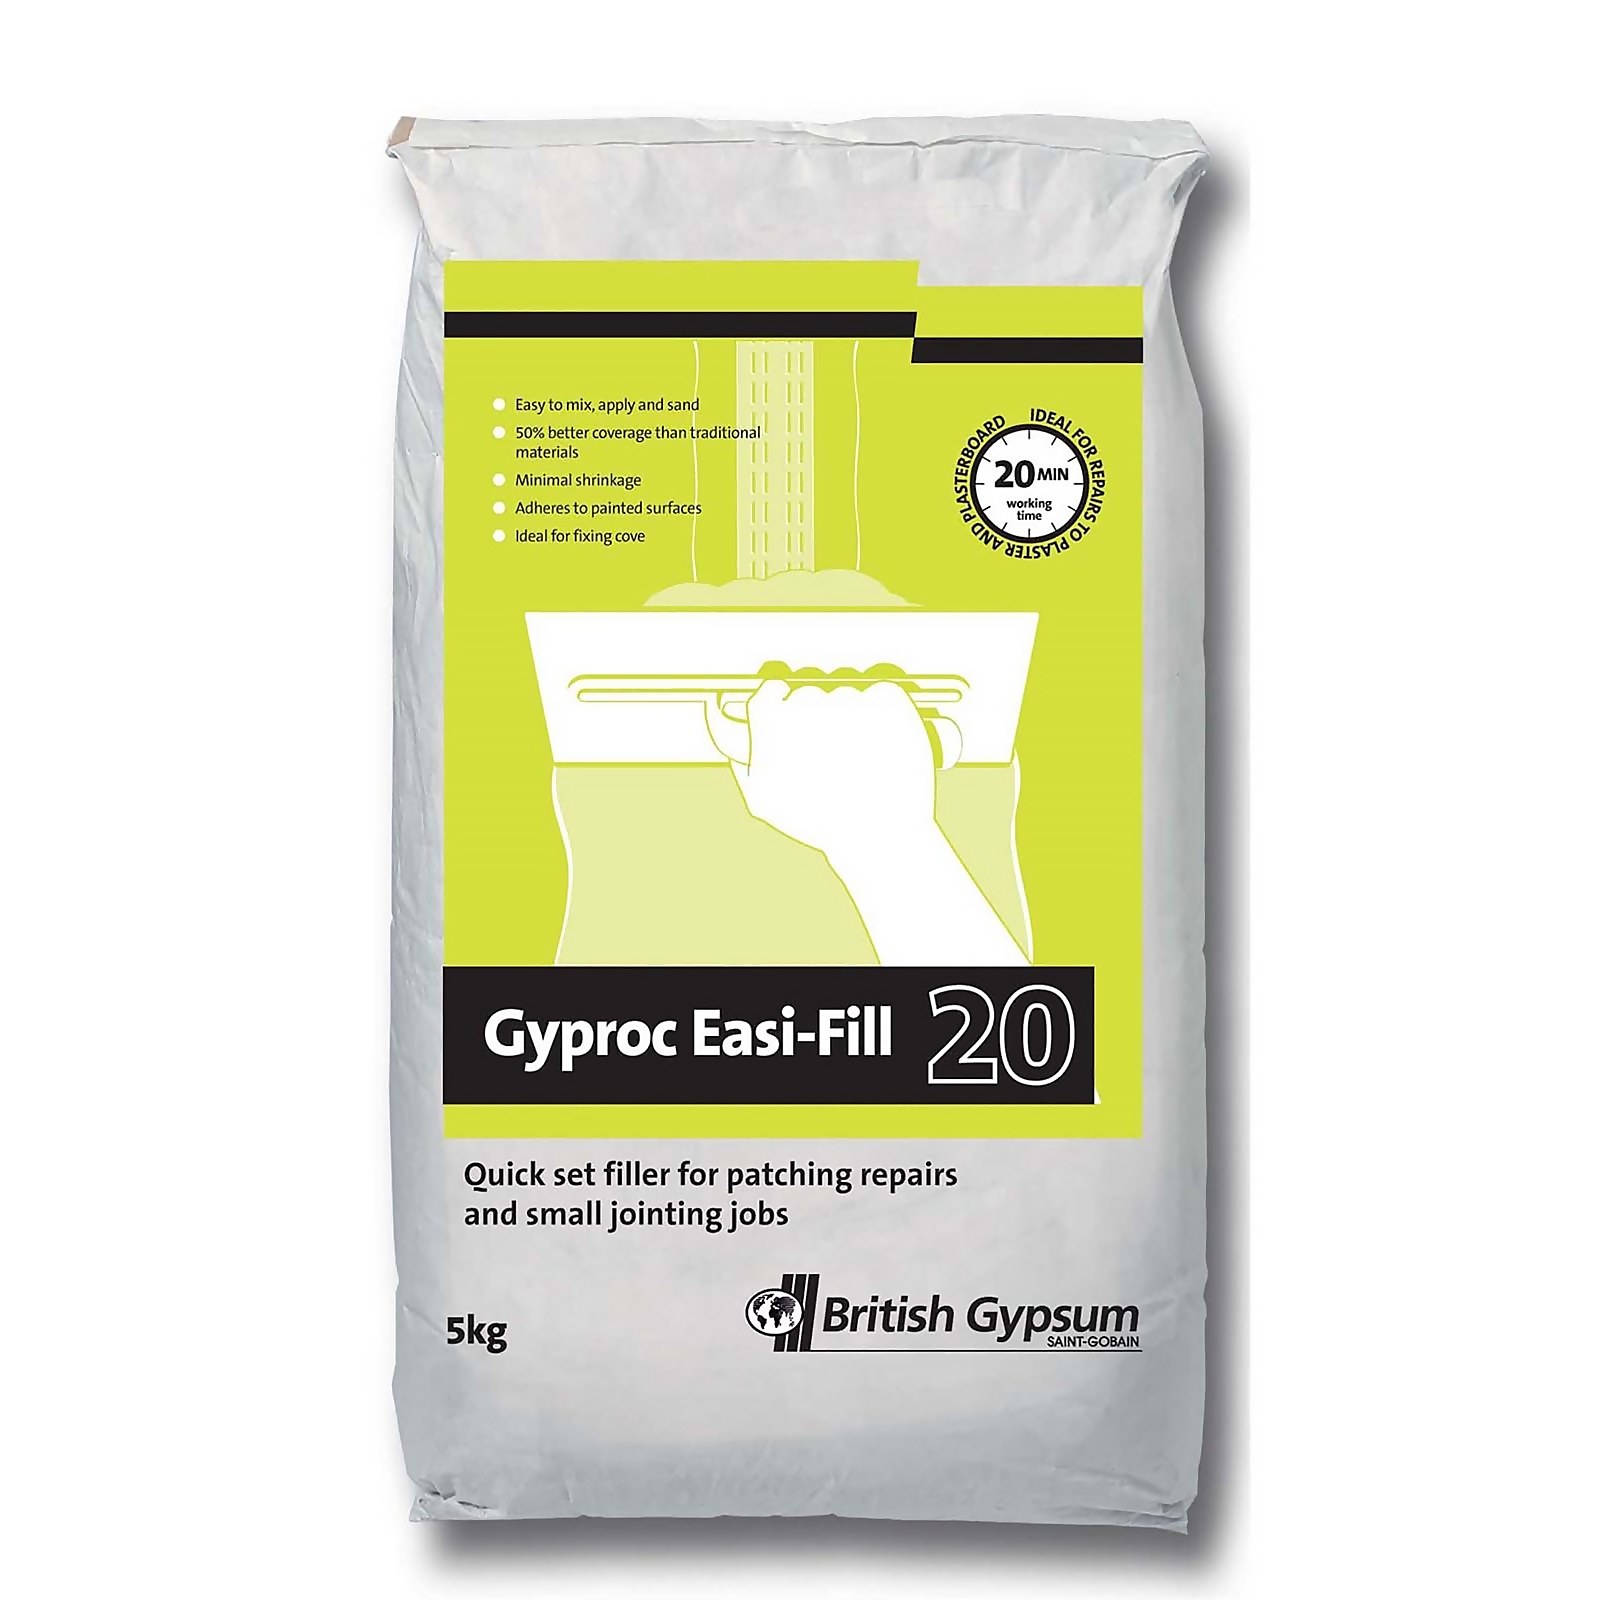 Photo of Gyproc Easi-fill 20 - 5kg